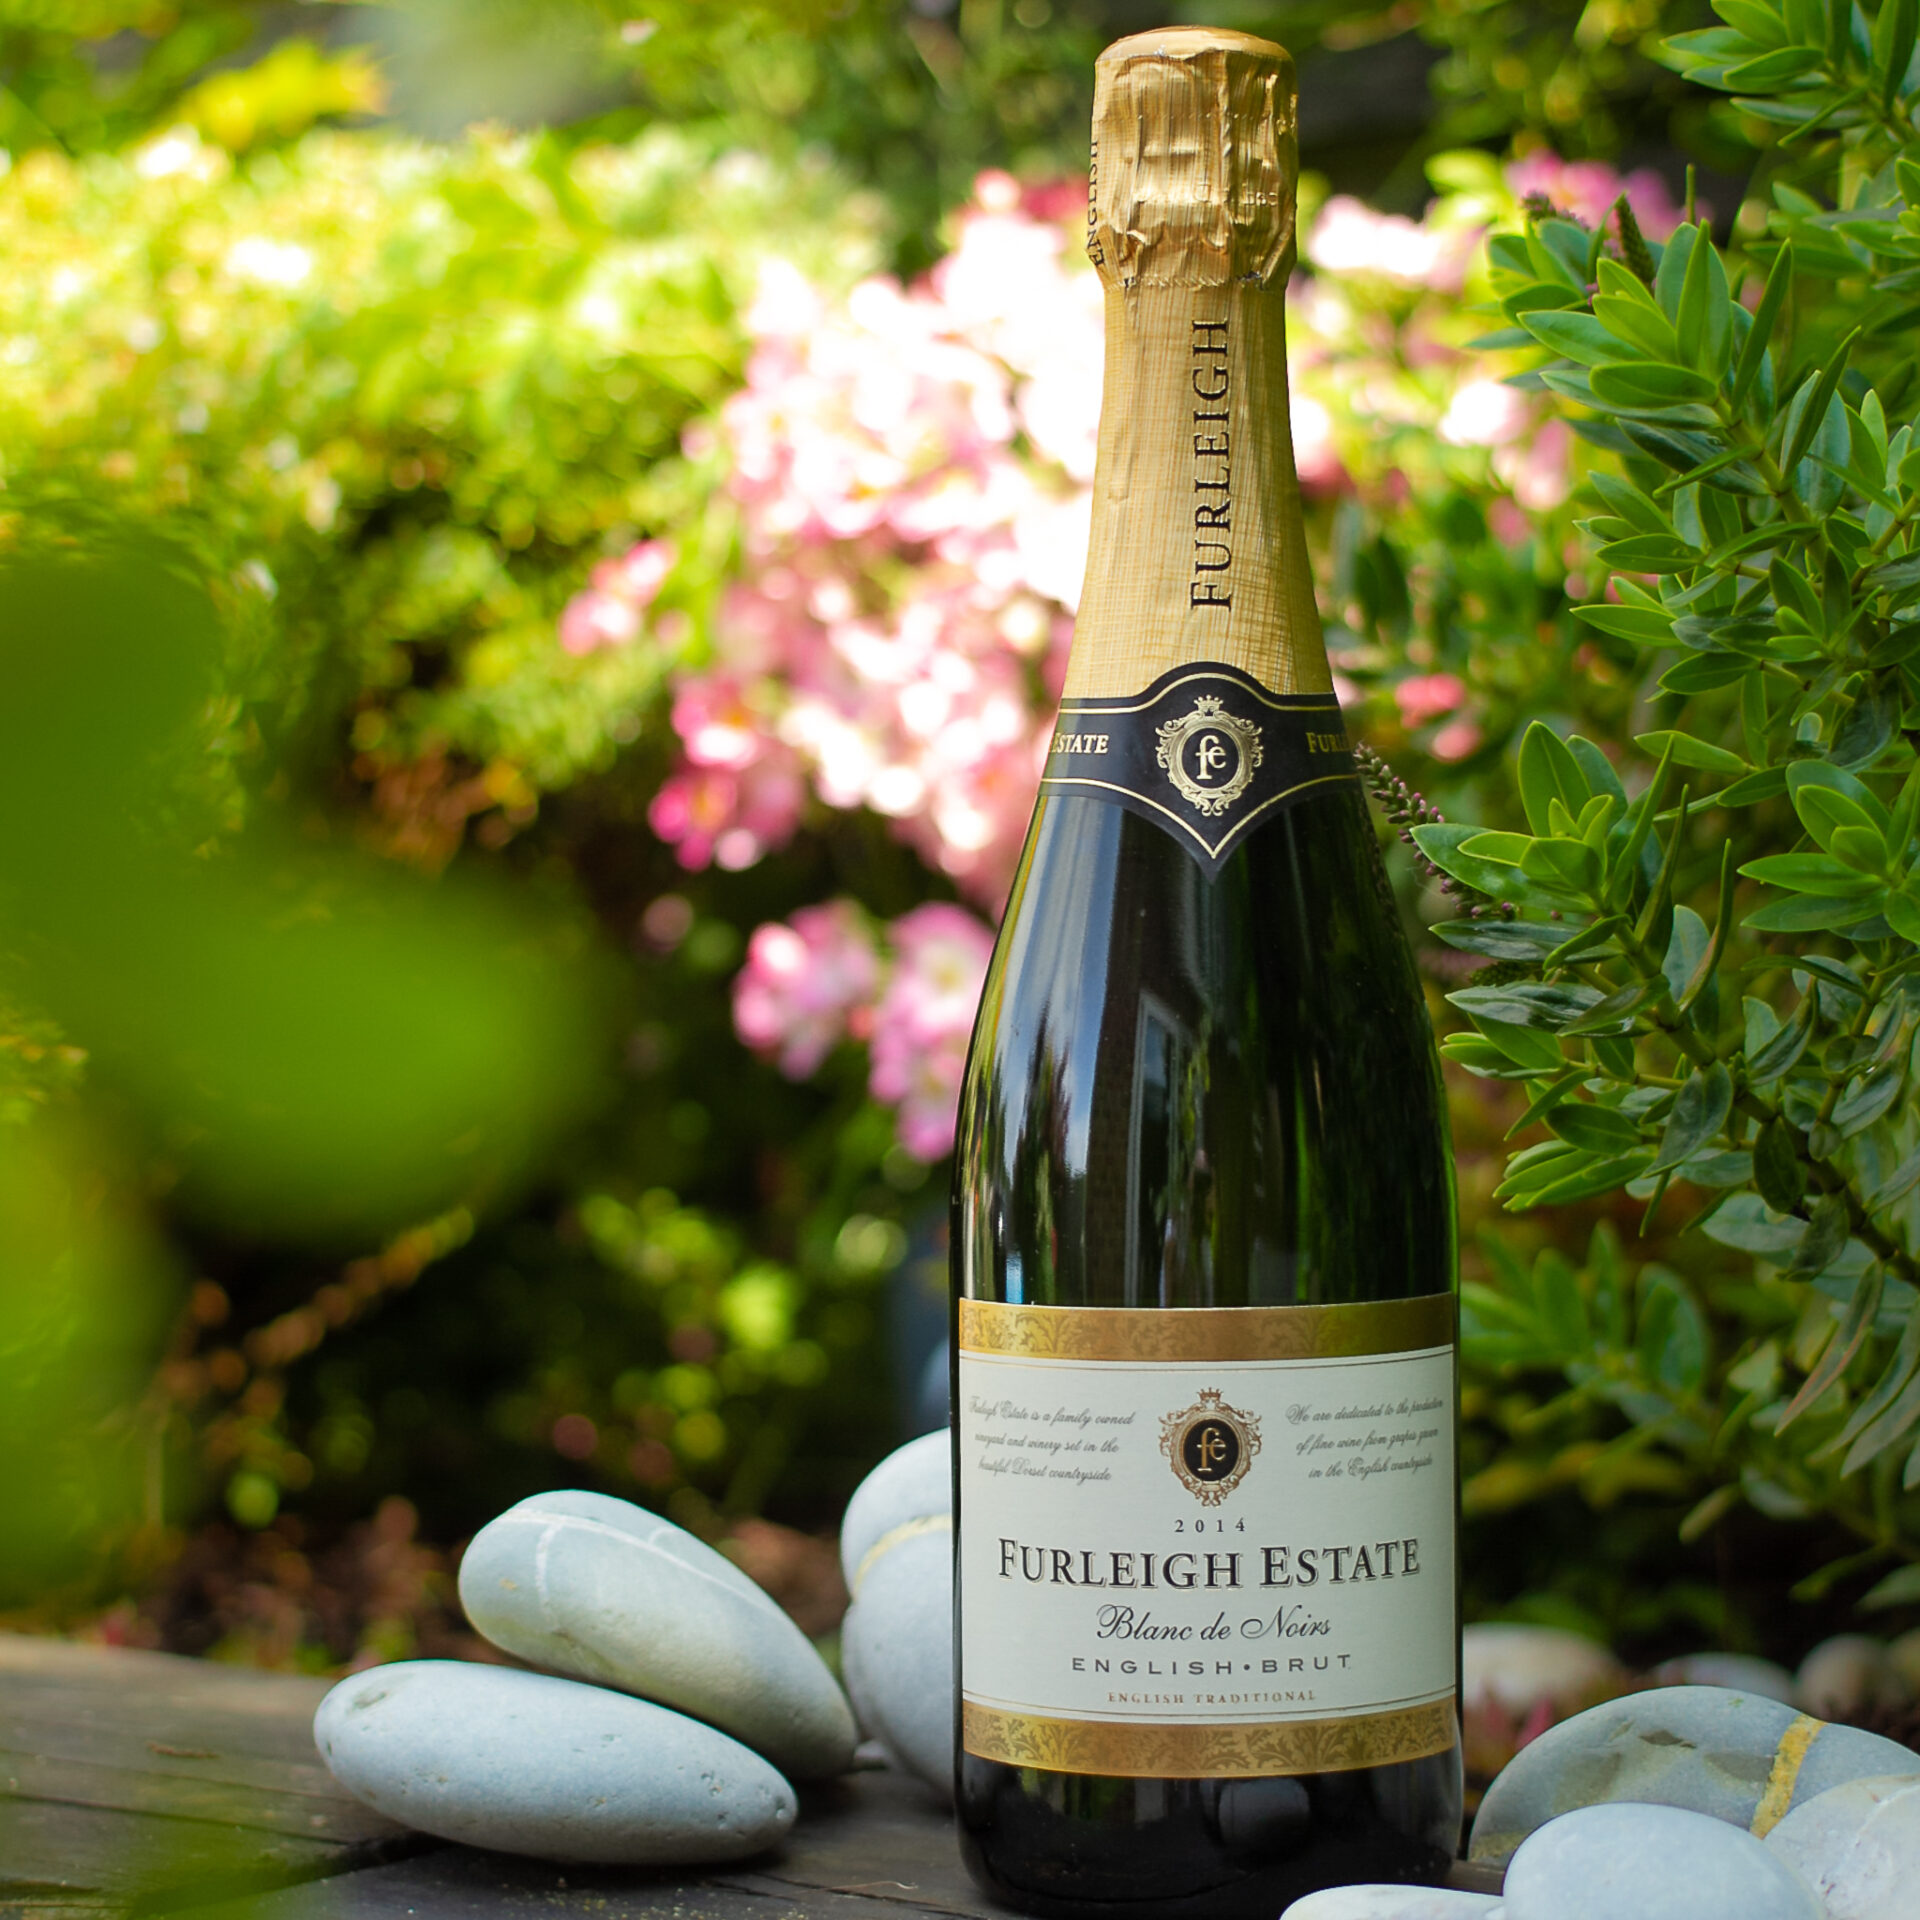 One bottle of Furleigh Estate wines in a scenic garden photo